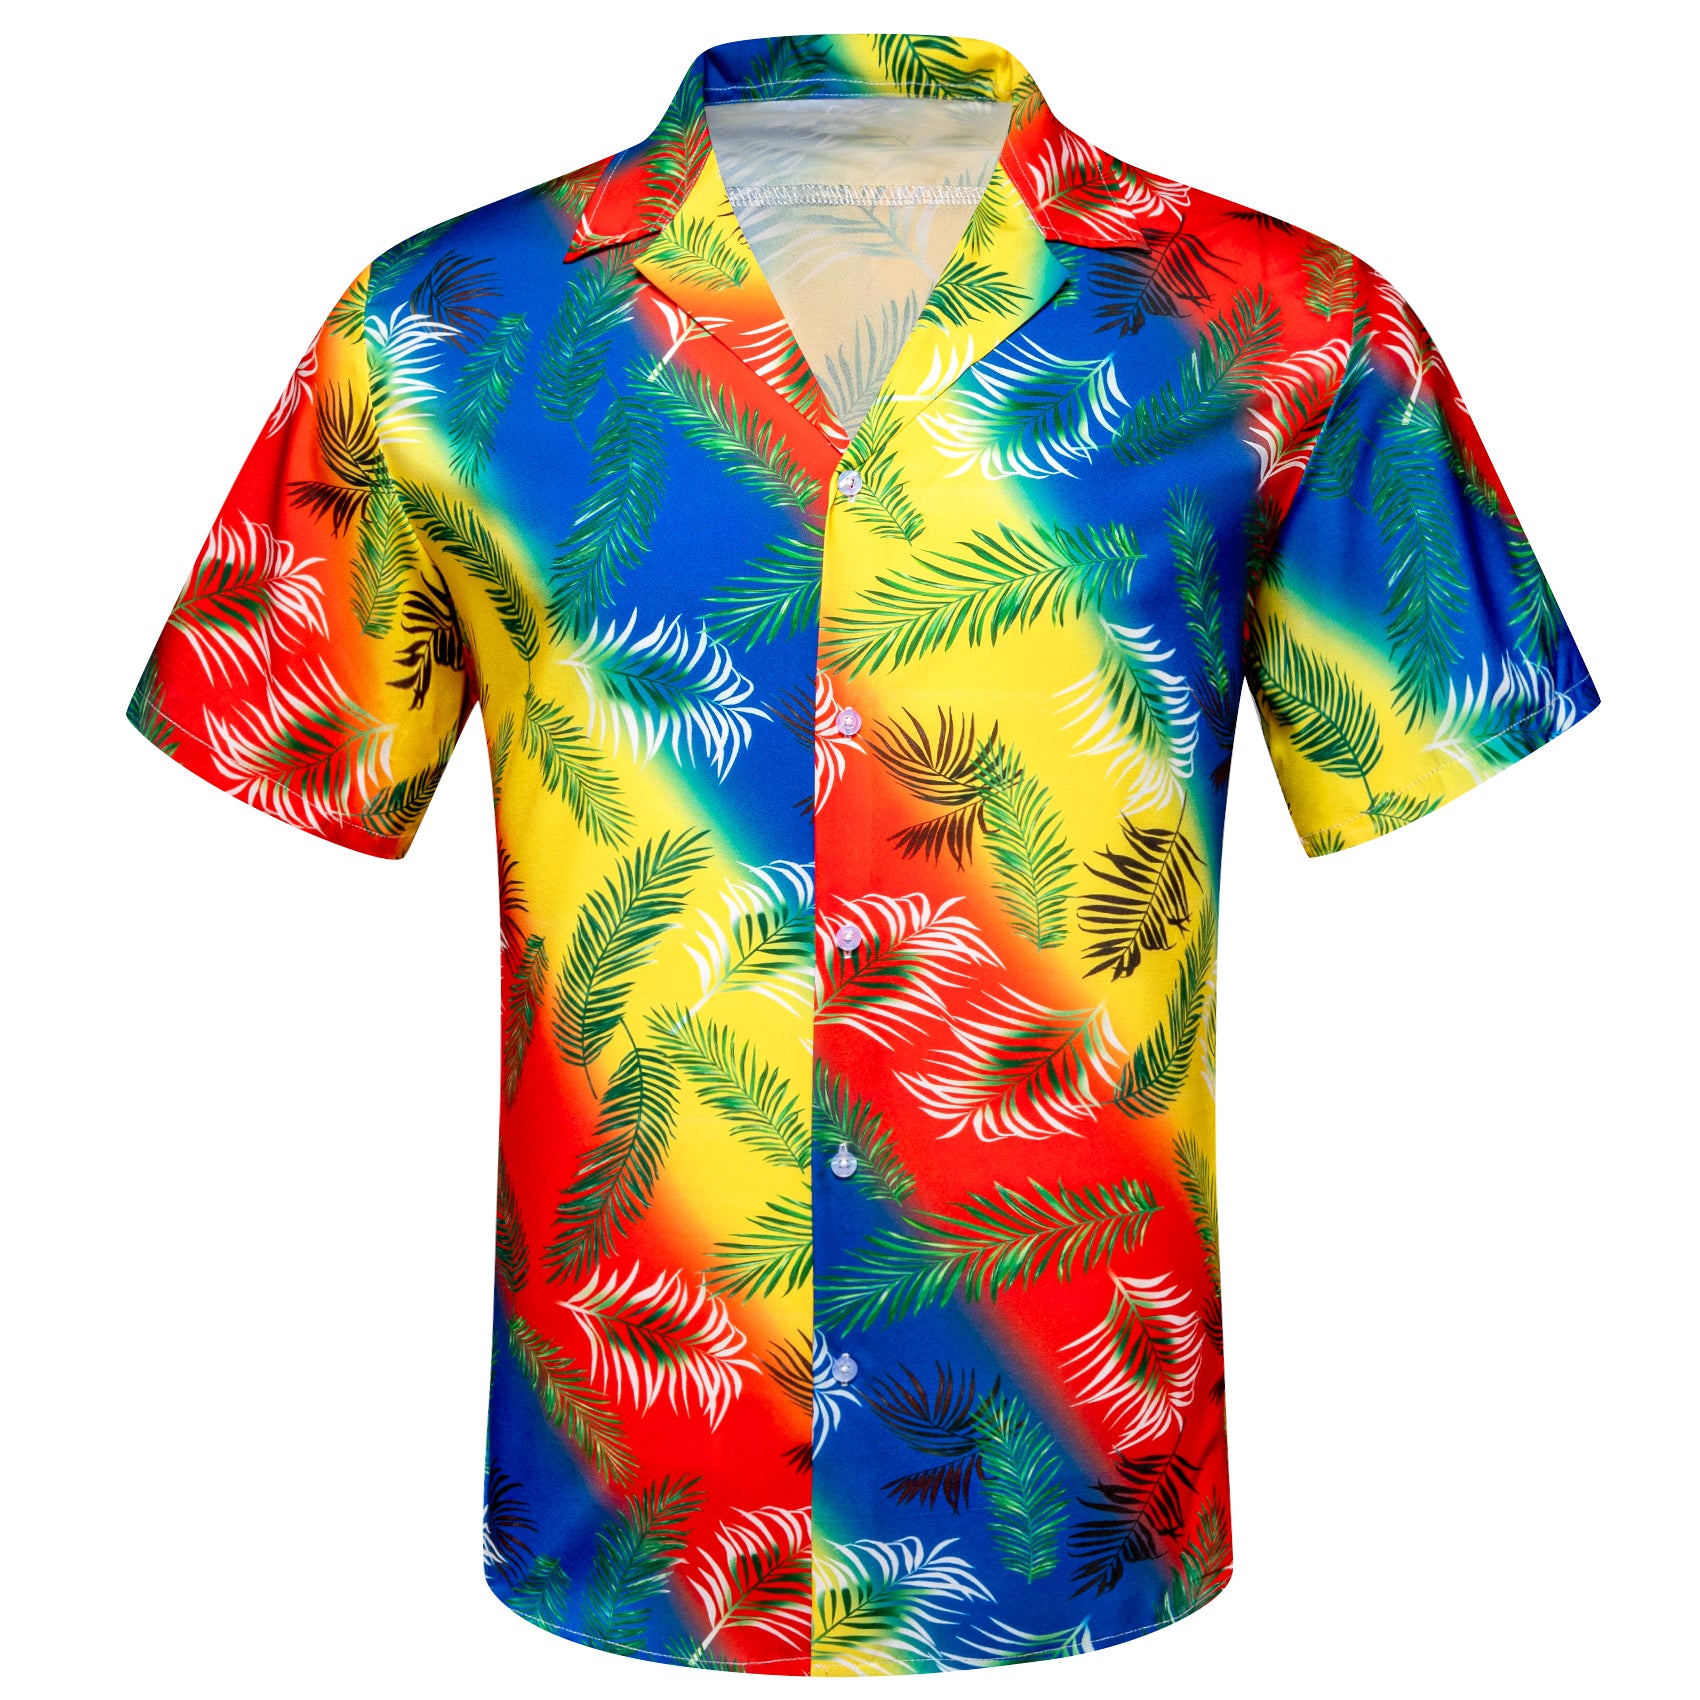 Men's Yellow Red Feather Floral Pattern Short Sleeves Summer Hawaii Shirt